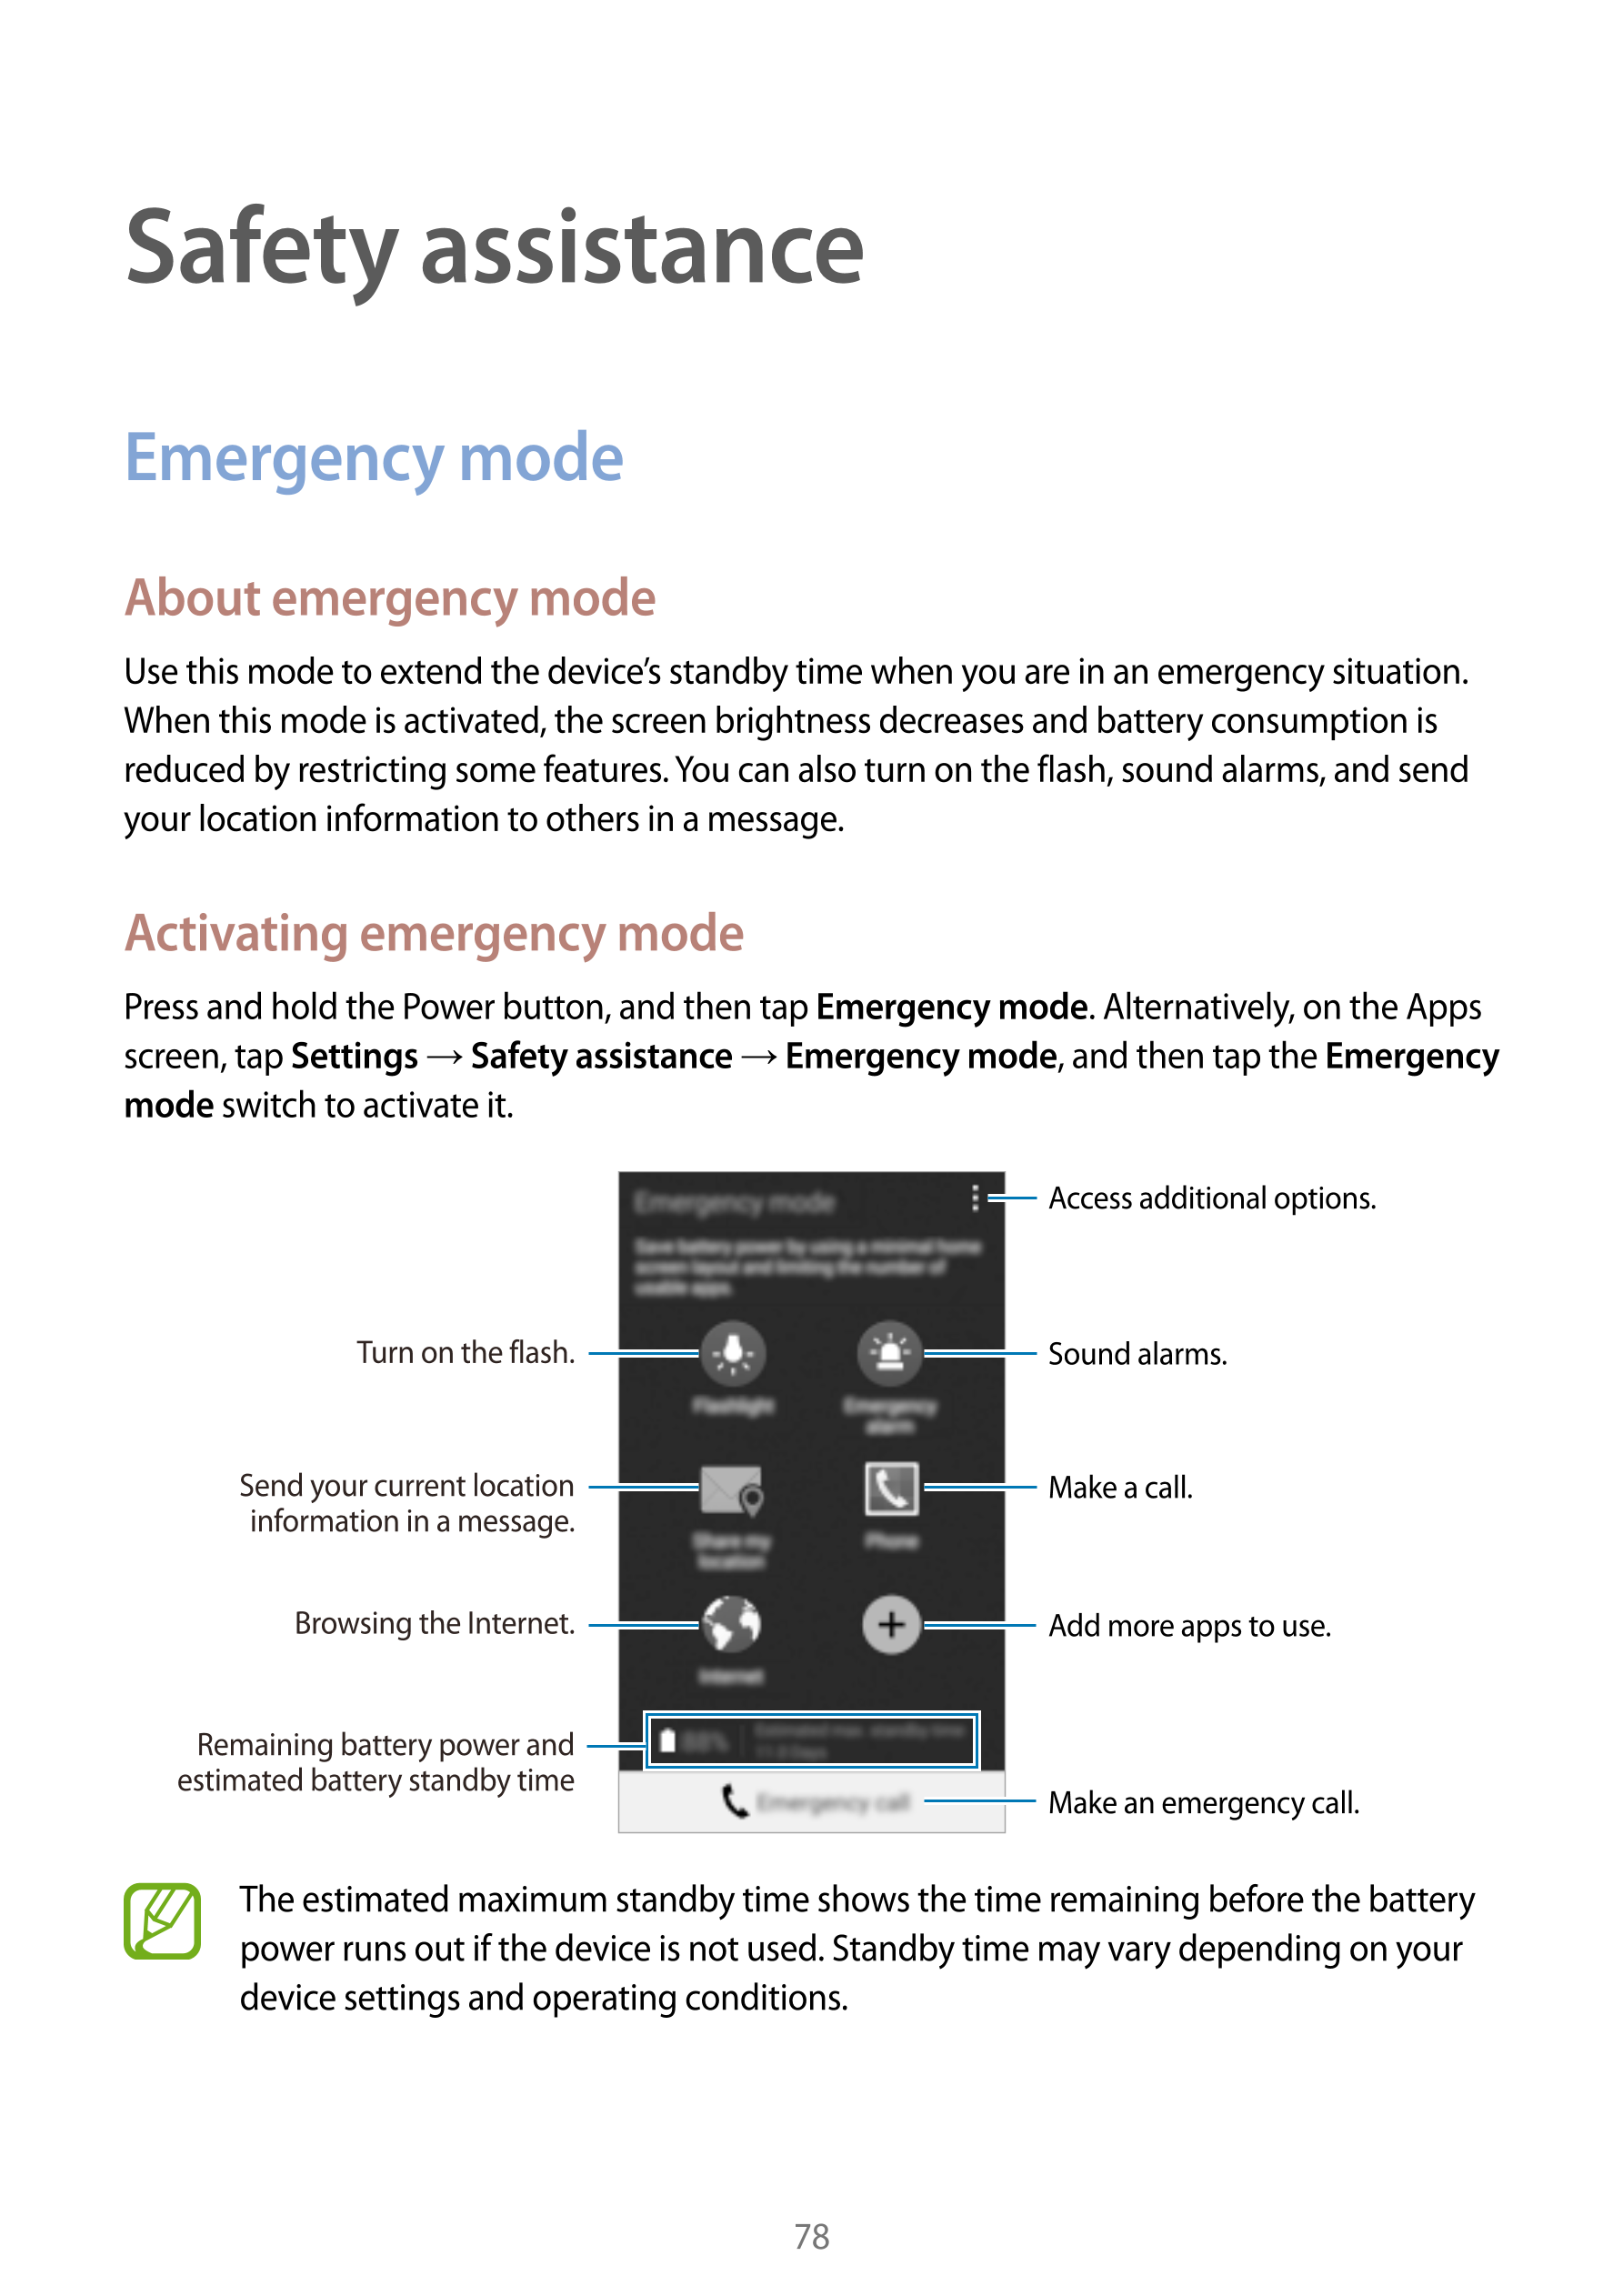 Safety assistance
Emergency mode
About emergency mode
Use this mode to extend the device’s standby time when you are in an emerg